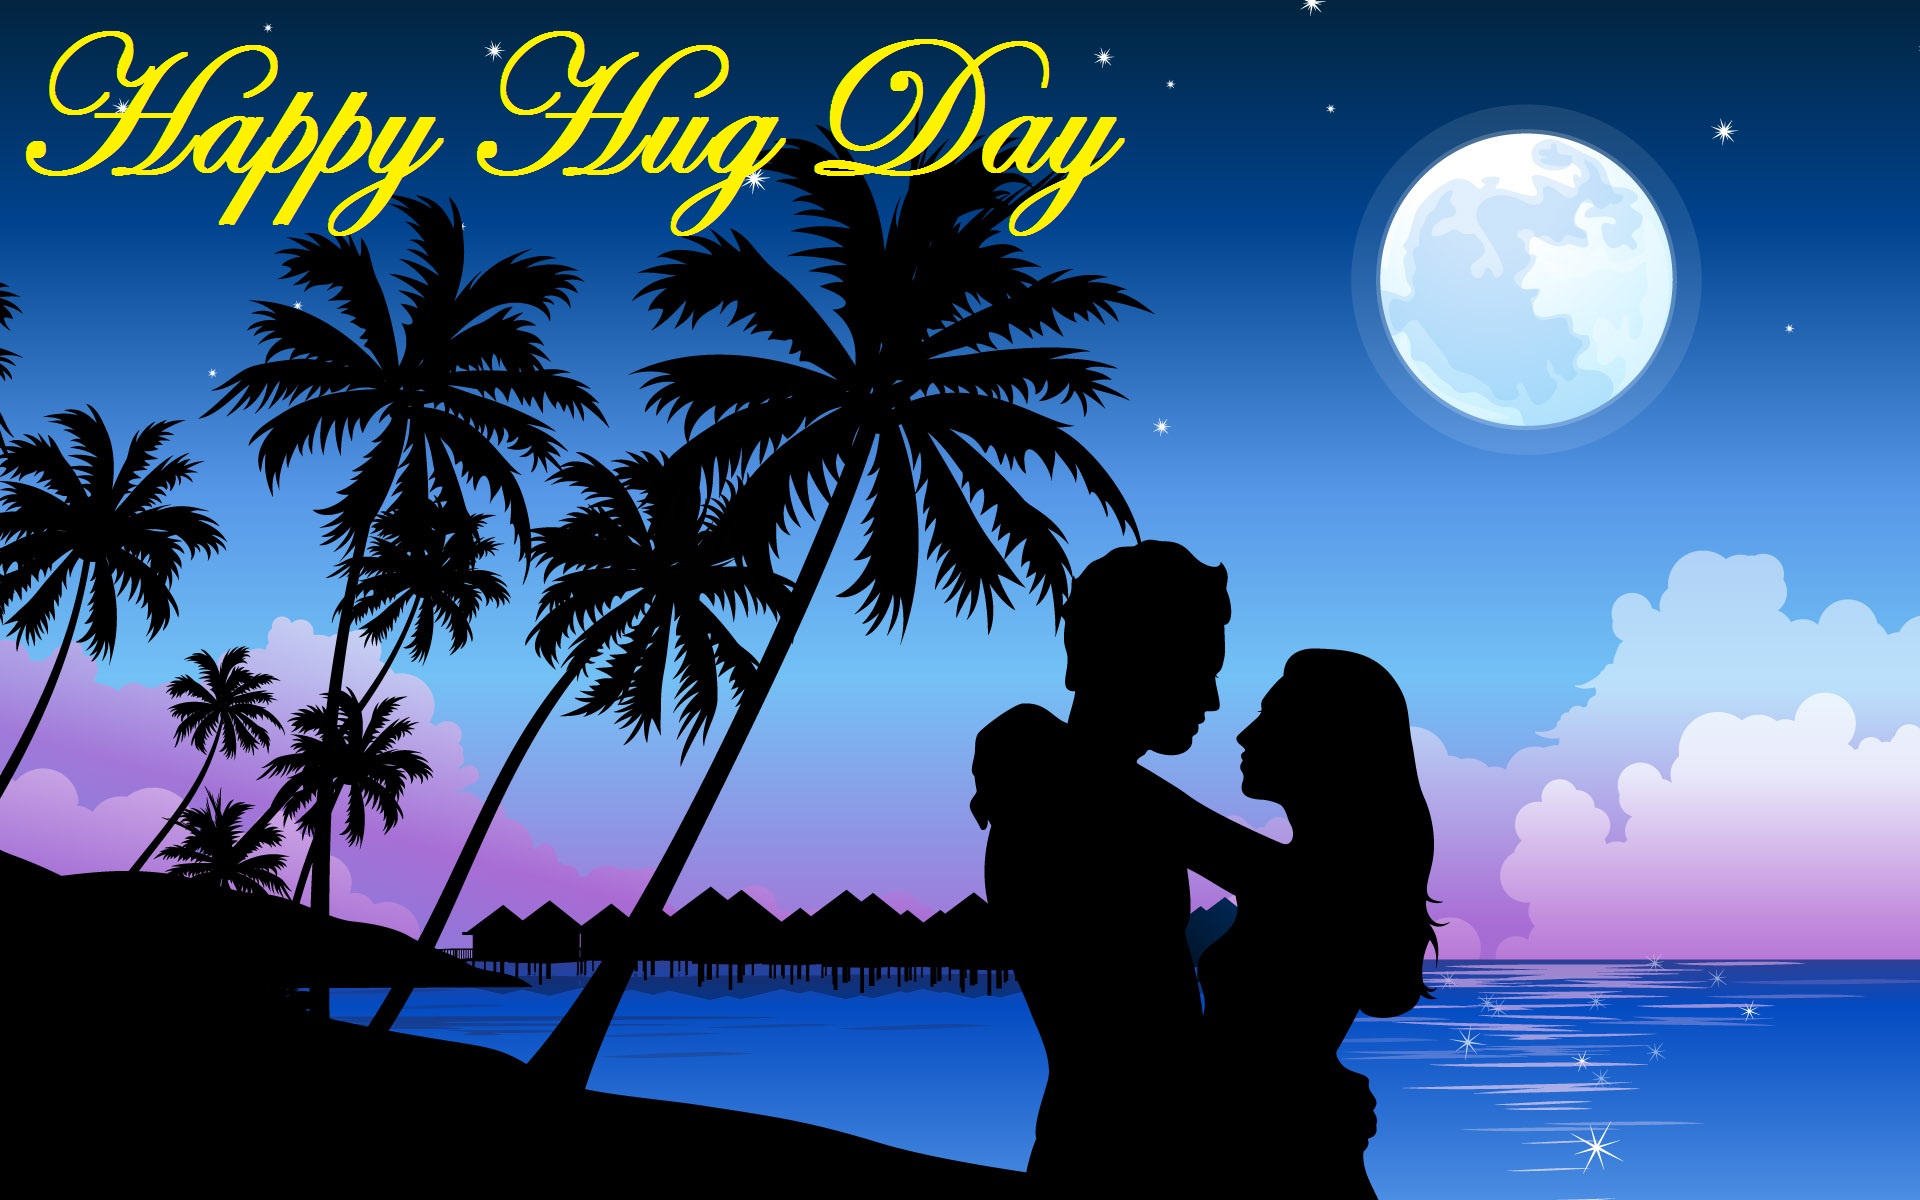 Hug Day 2015 HD Wallpapers Images Pics Photos for Desktop Mobile Free Download